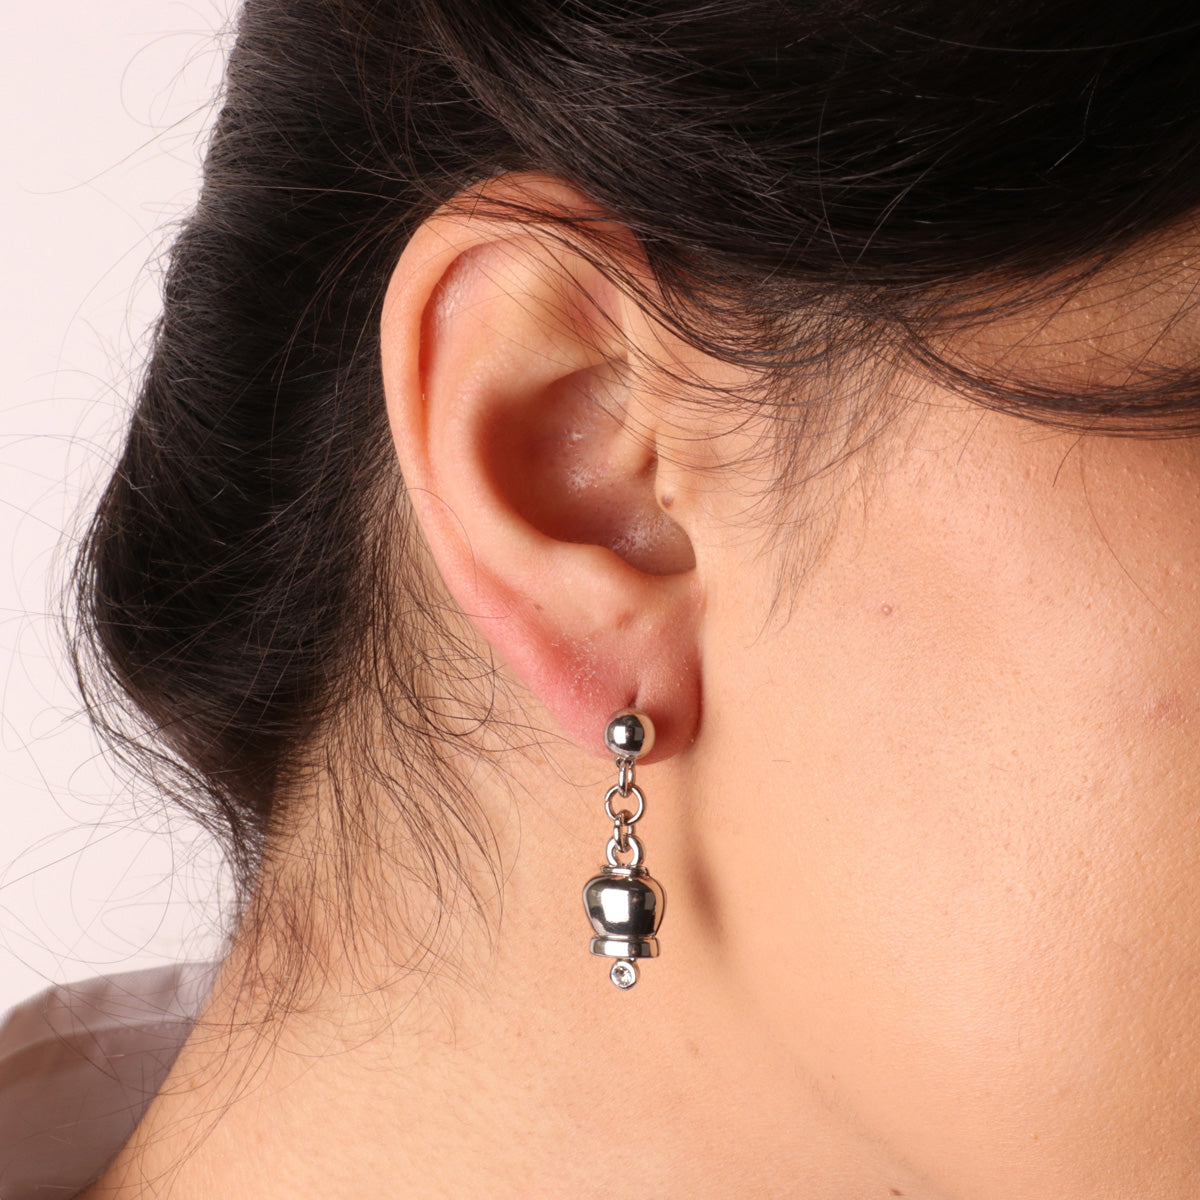 Metal earrings with pendant lucky bells, embellished with light point